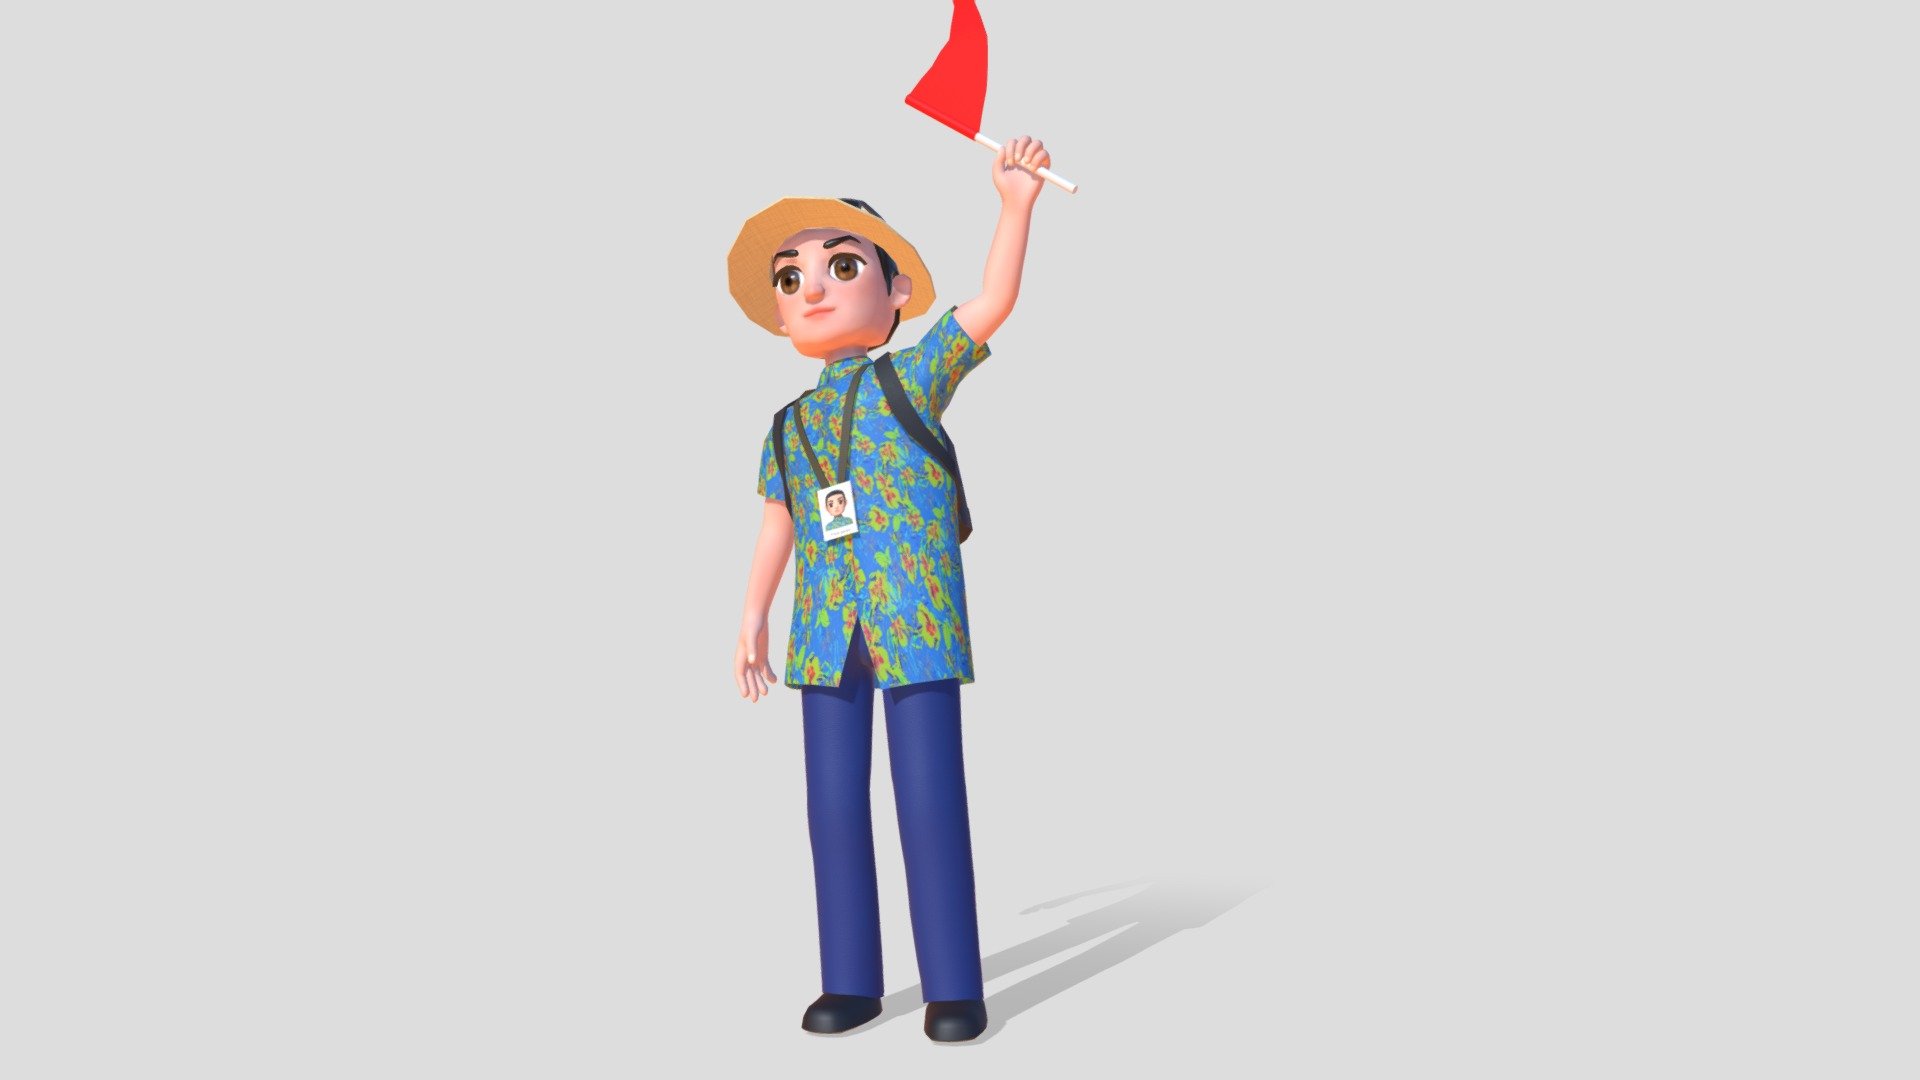 Stylised local tour guide avatar with lanyard and tour flag accessories.
Animations included: Gesturing (Loop), Pointing, Walking (Loop), Running (Loop), Waving (Loop), Idle (Loop), Talking (Loop)

Login to STB’s Tourism Information &amp; Services Hub for free downloads:
https://tih.stb.gov.sg/content/tih/en/marketing-and-media-assets/digital-images-andvideoslisting/digital-images-and-videos-detail.104bc673010390547e29262b90048e5ade5.Tour+Guide.html - Tour Guide - 3D model by STB-TC 3d model